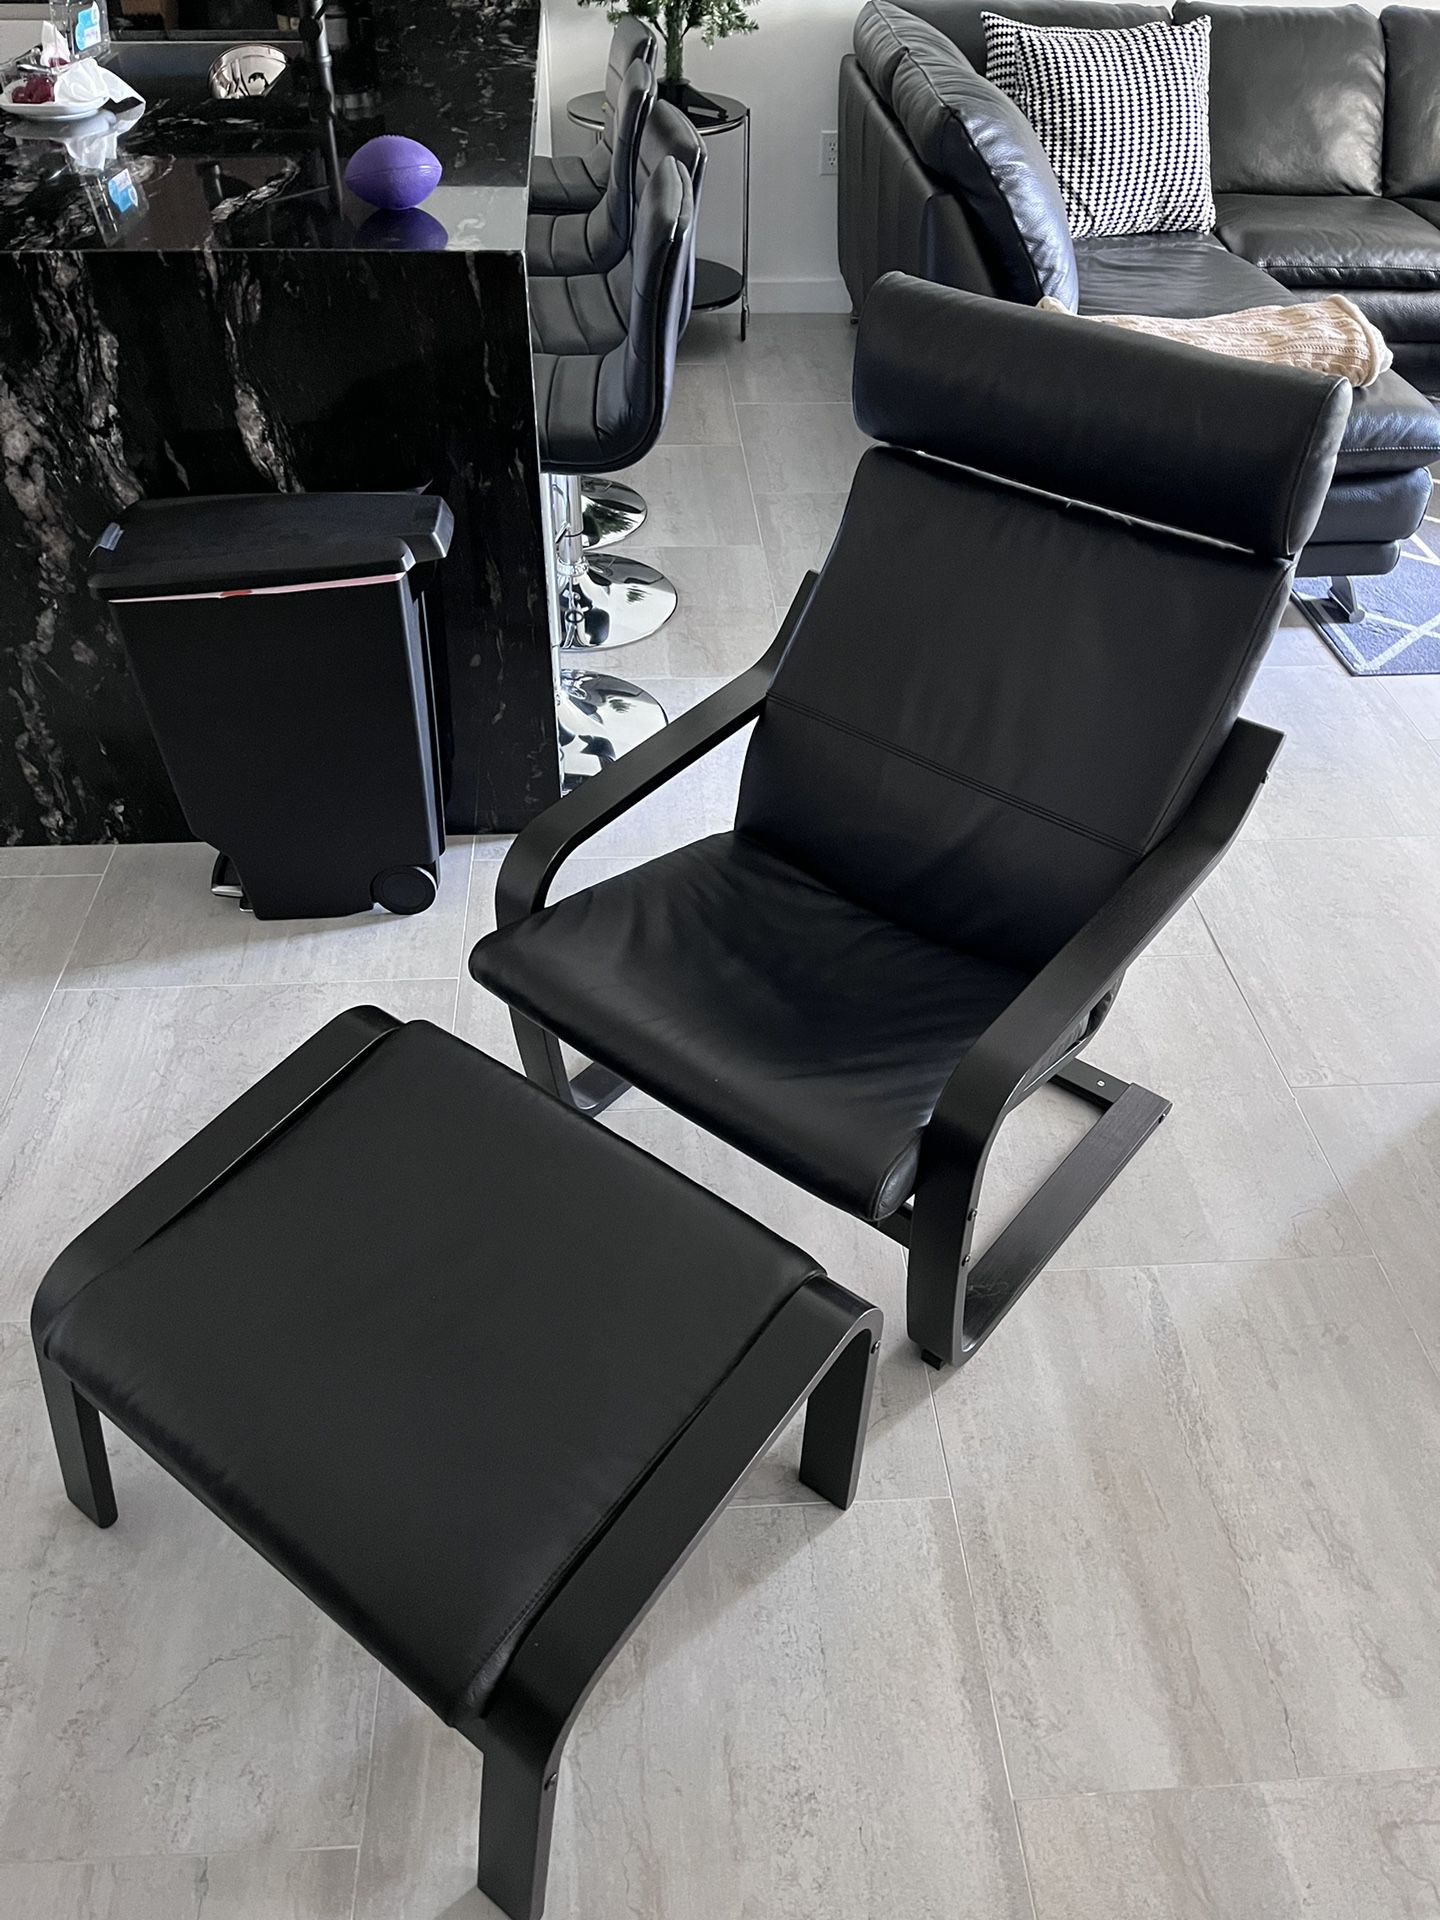 IKEA Black leather Arm Chair With Ottoman